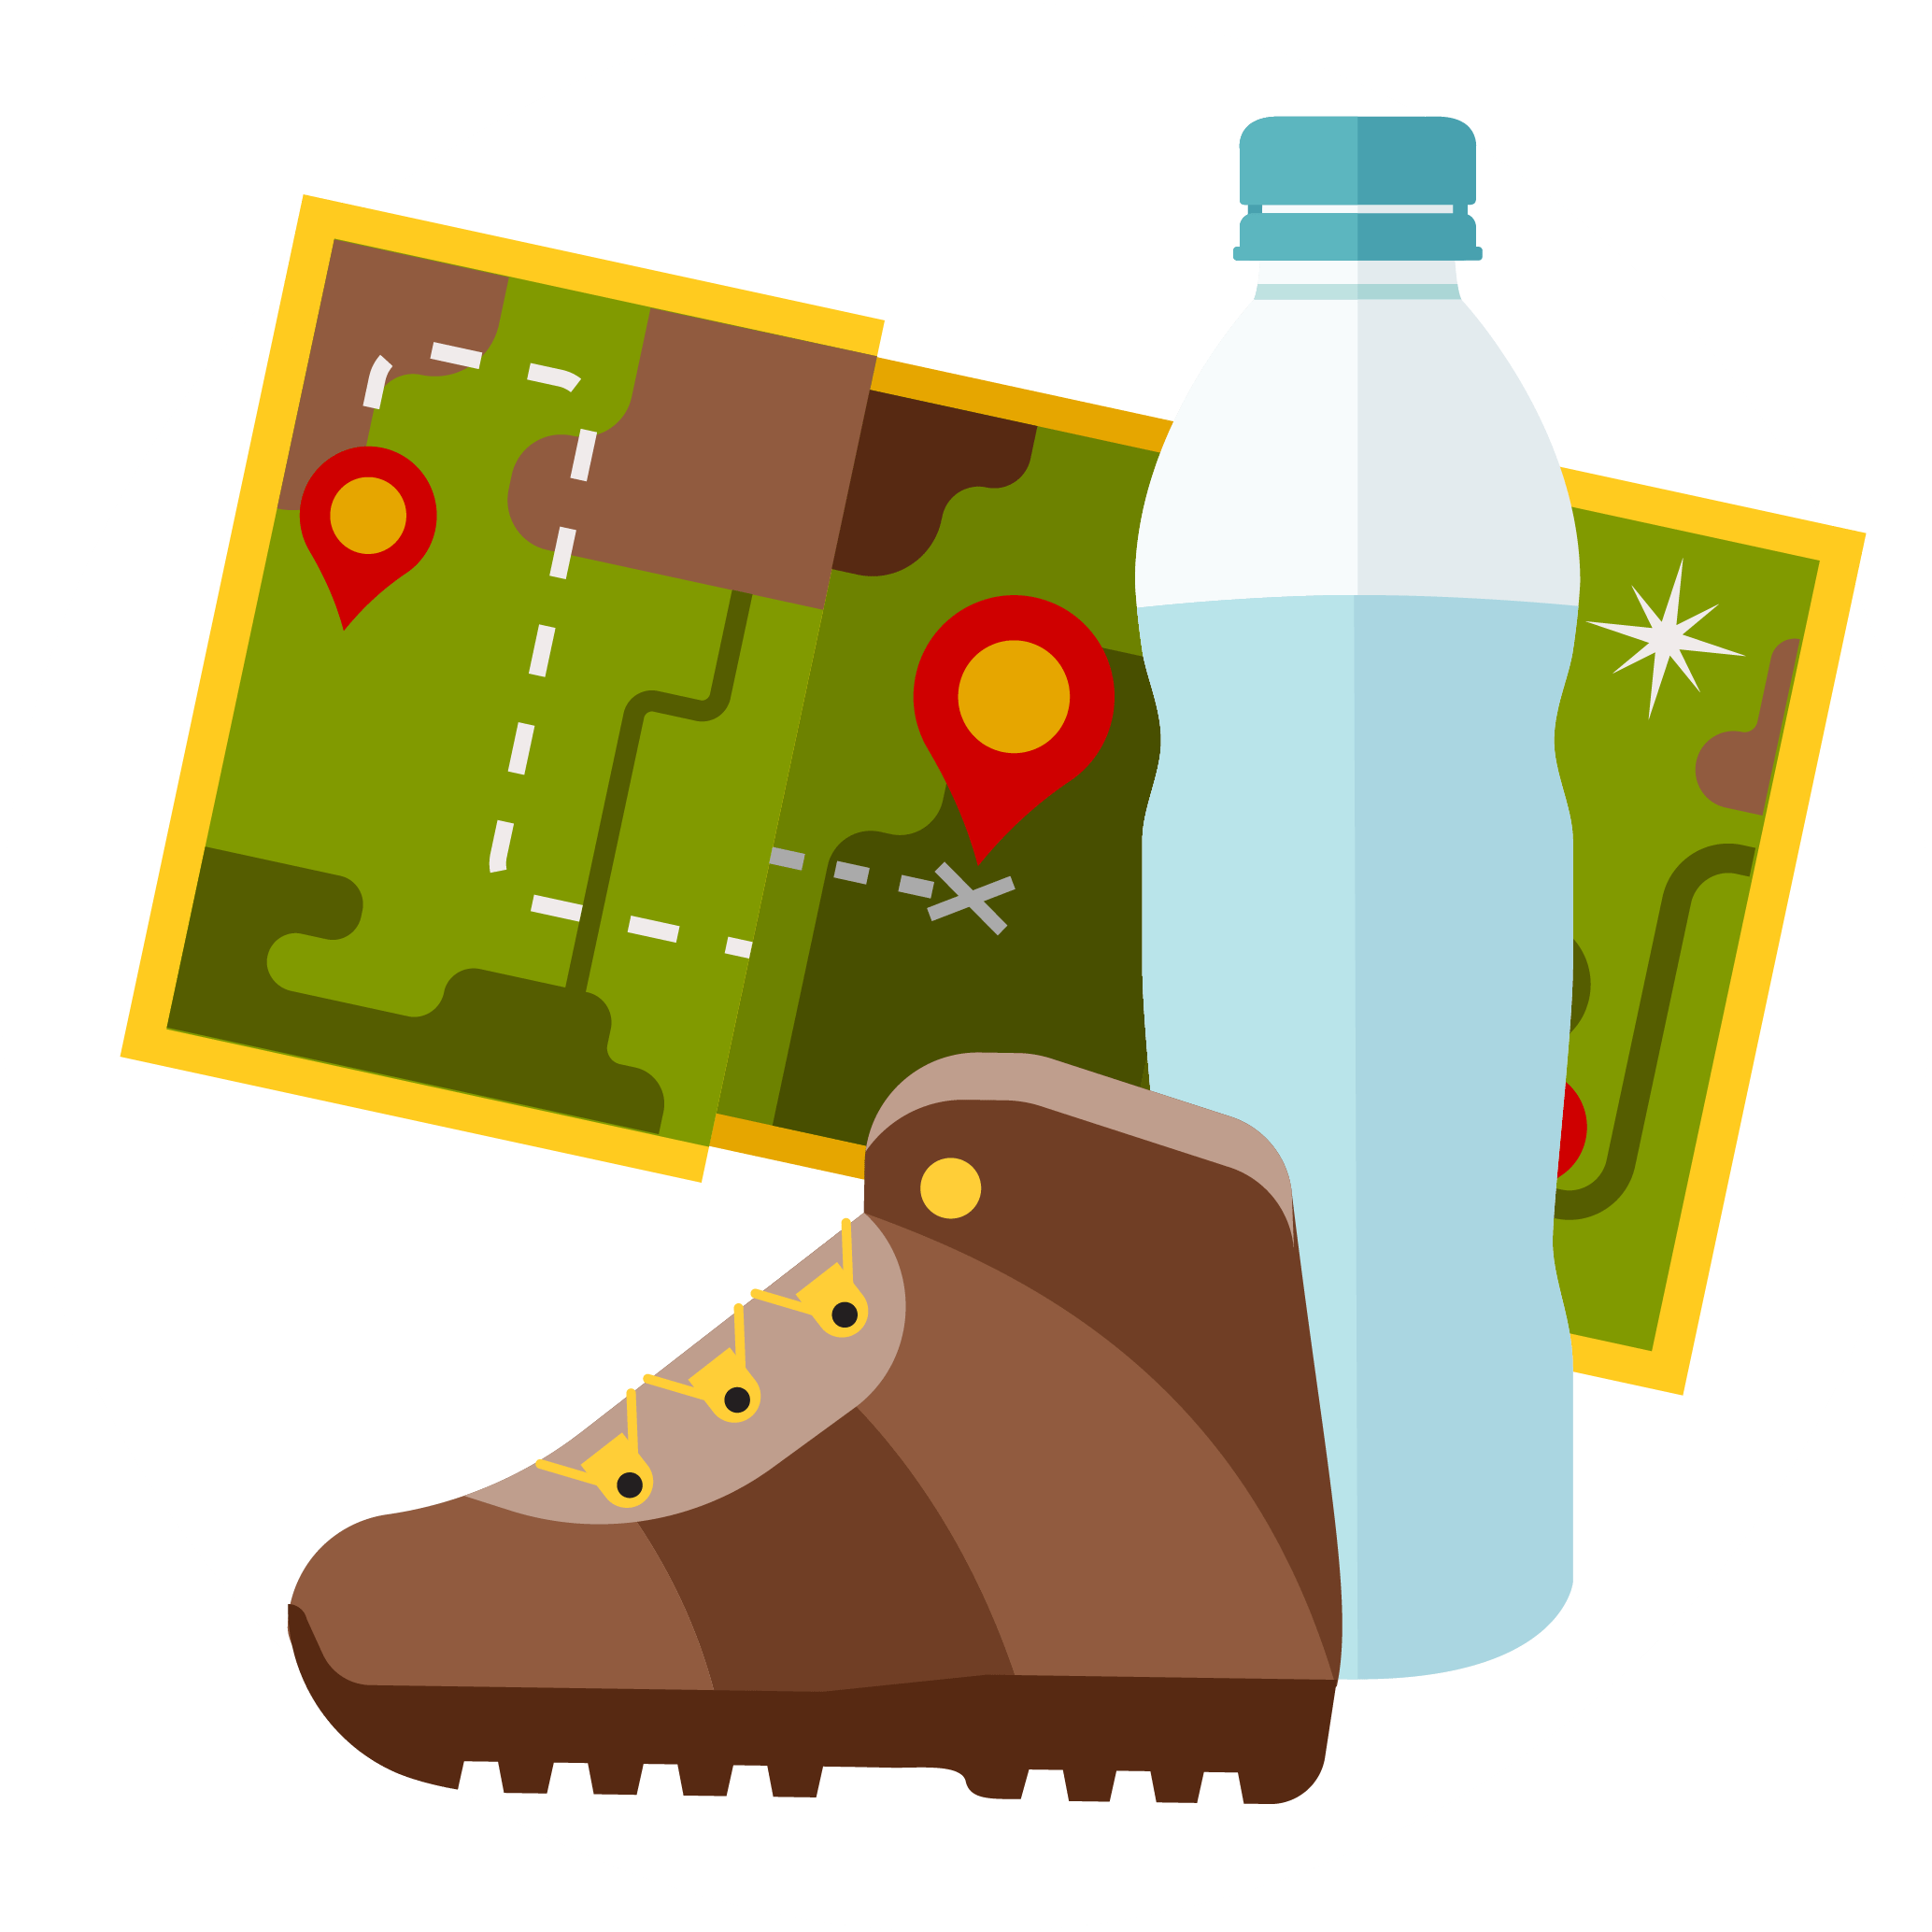 hiking supplies, boot, map and water